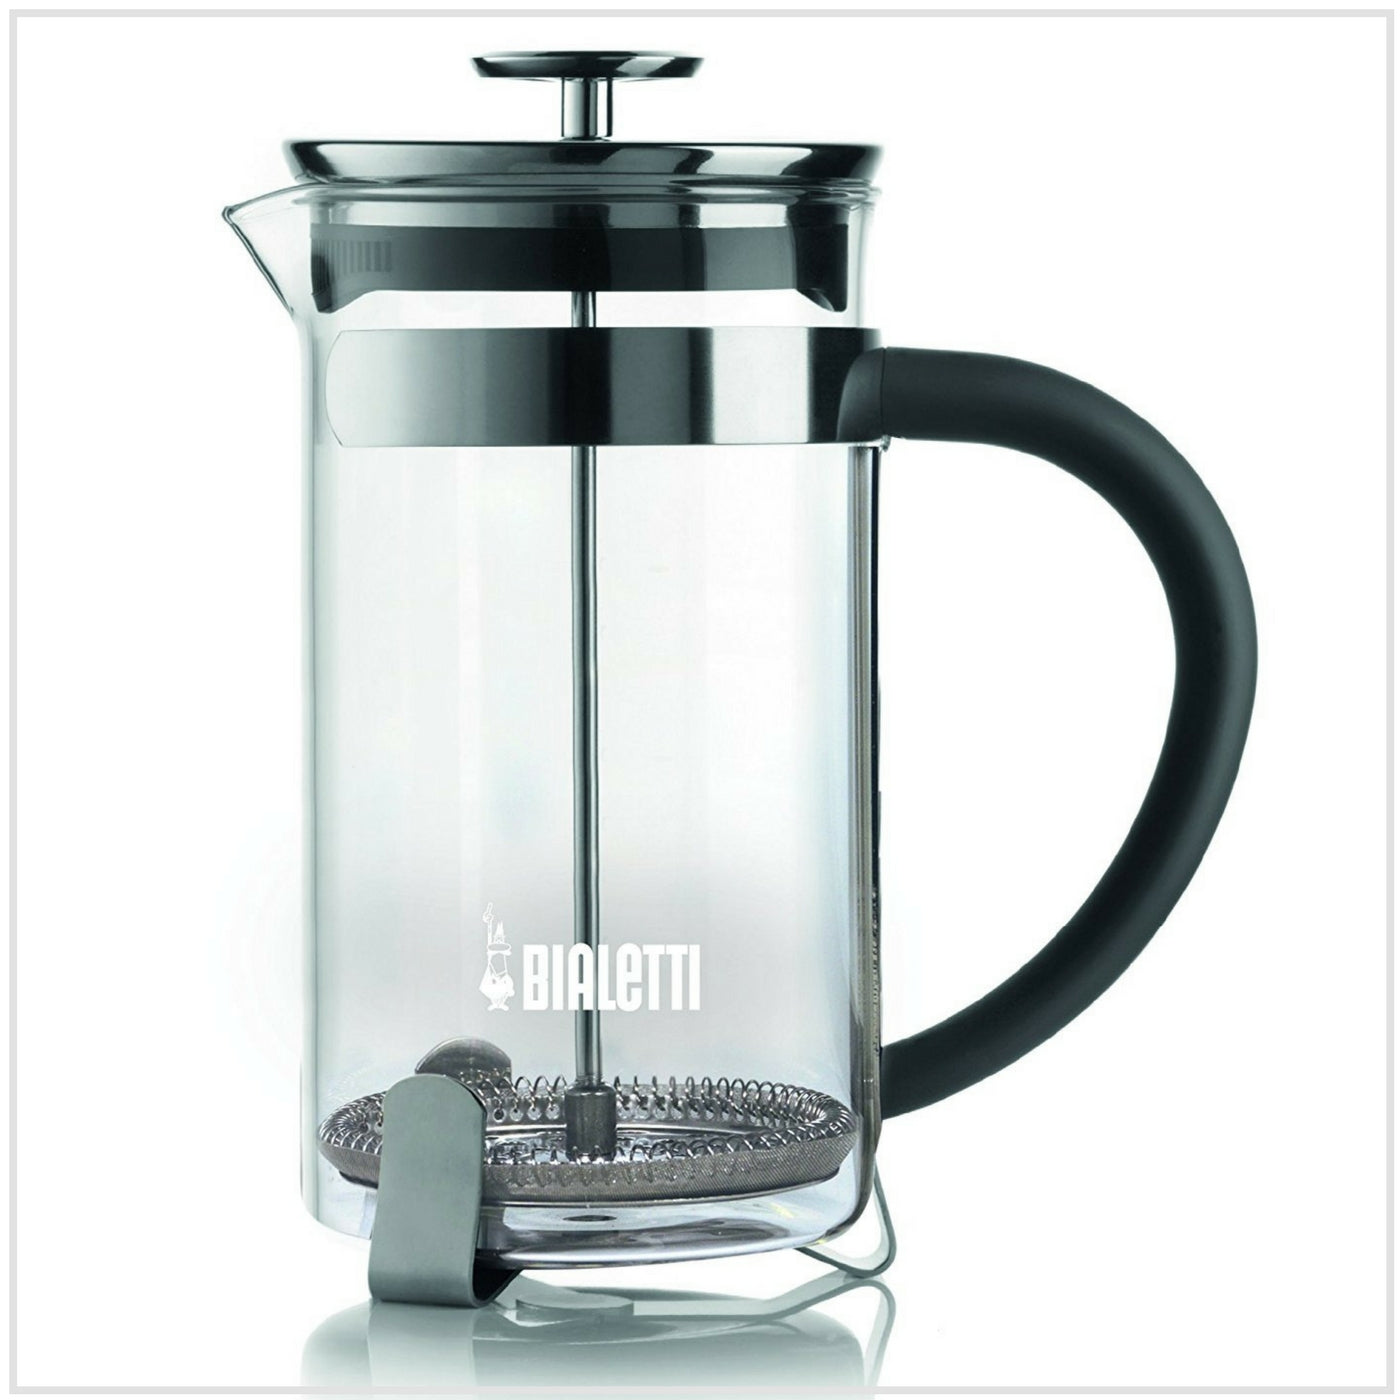 Bialetti 8 Cup Coffee French Press - 1L